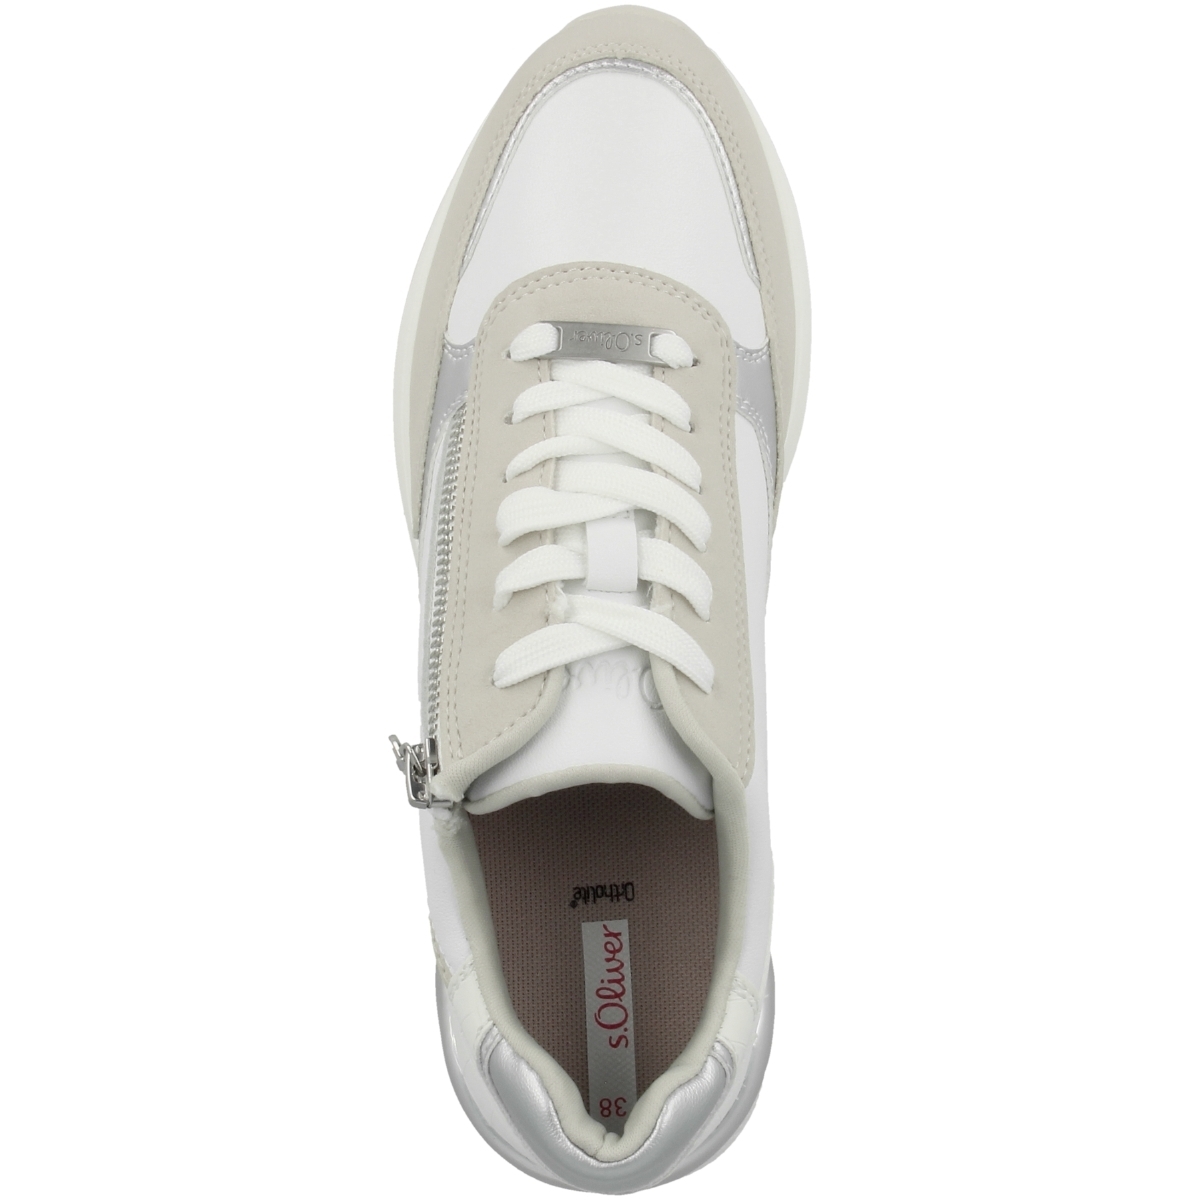 s.Oliver 5-23608-38 Sneaker weiss